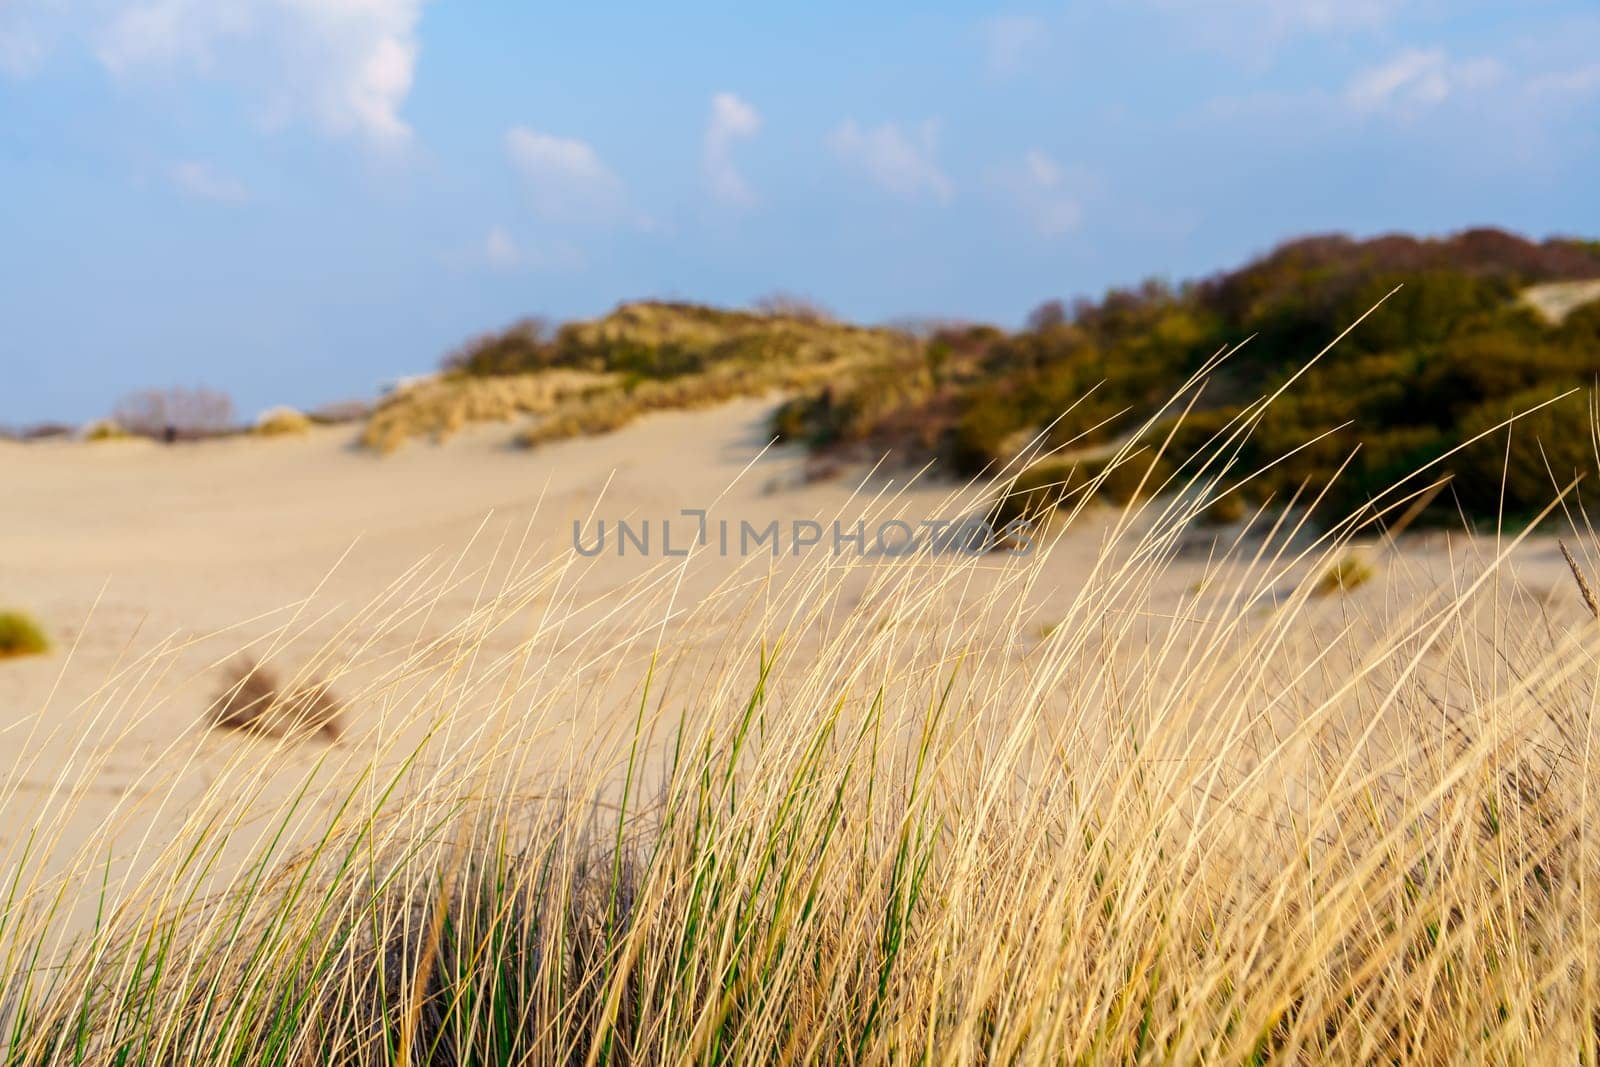 Sunny Day on Sandy Dunes in The Hague, Netherlands: Amazing Sand Dunes of Europe.